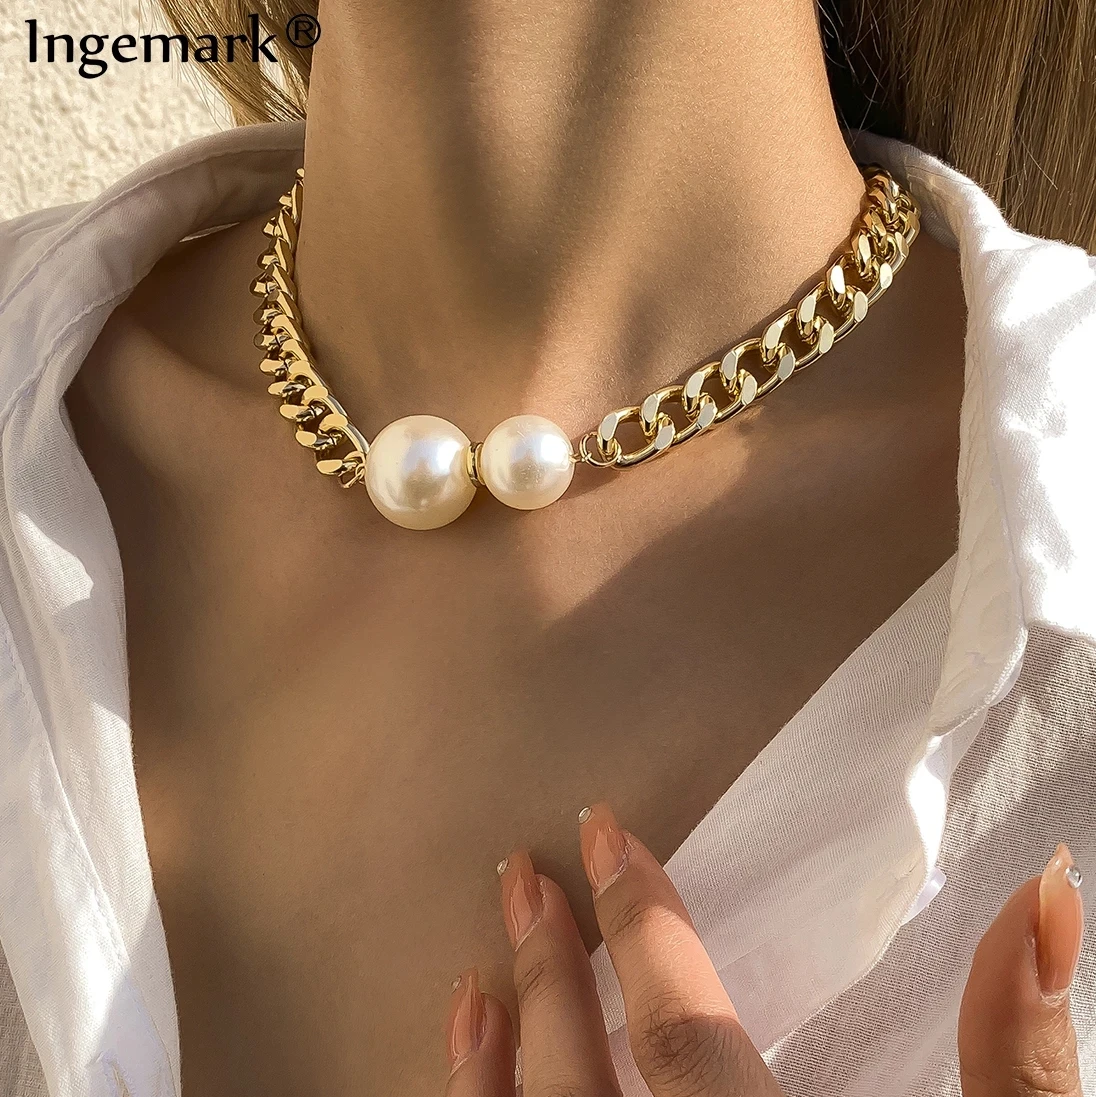 Vintage Smooth Necklace | Chokers Necklaces - Vintage Chains - Aliexpress